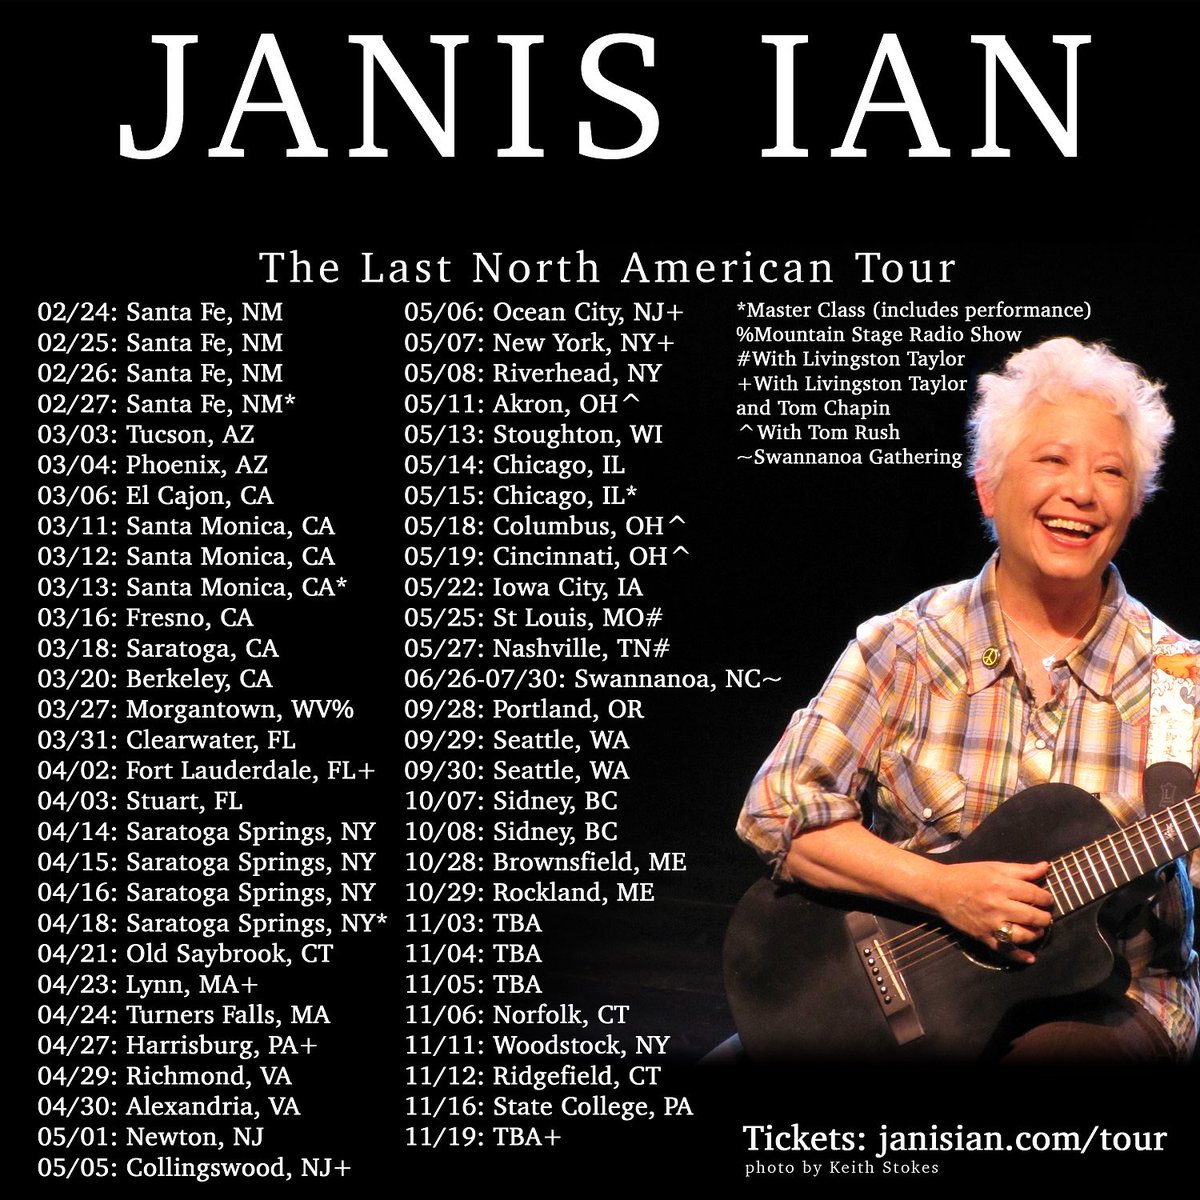 Don’t miss this chance to see my good friend, Janis Ian, in concert. She’s an incredible performer.